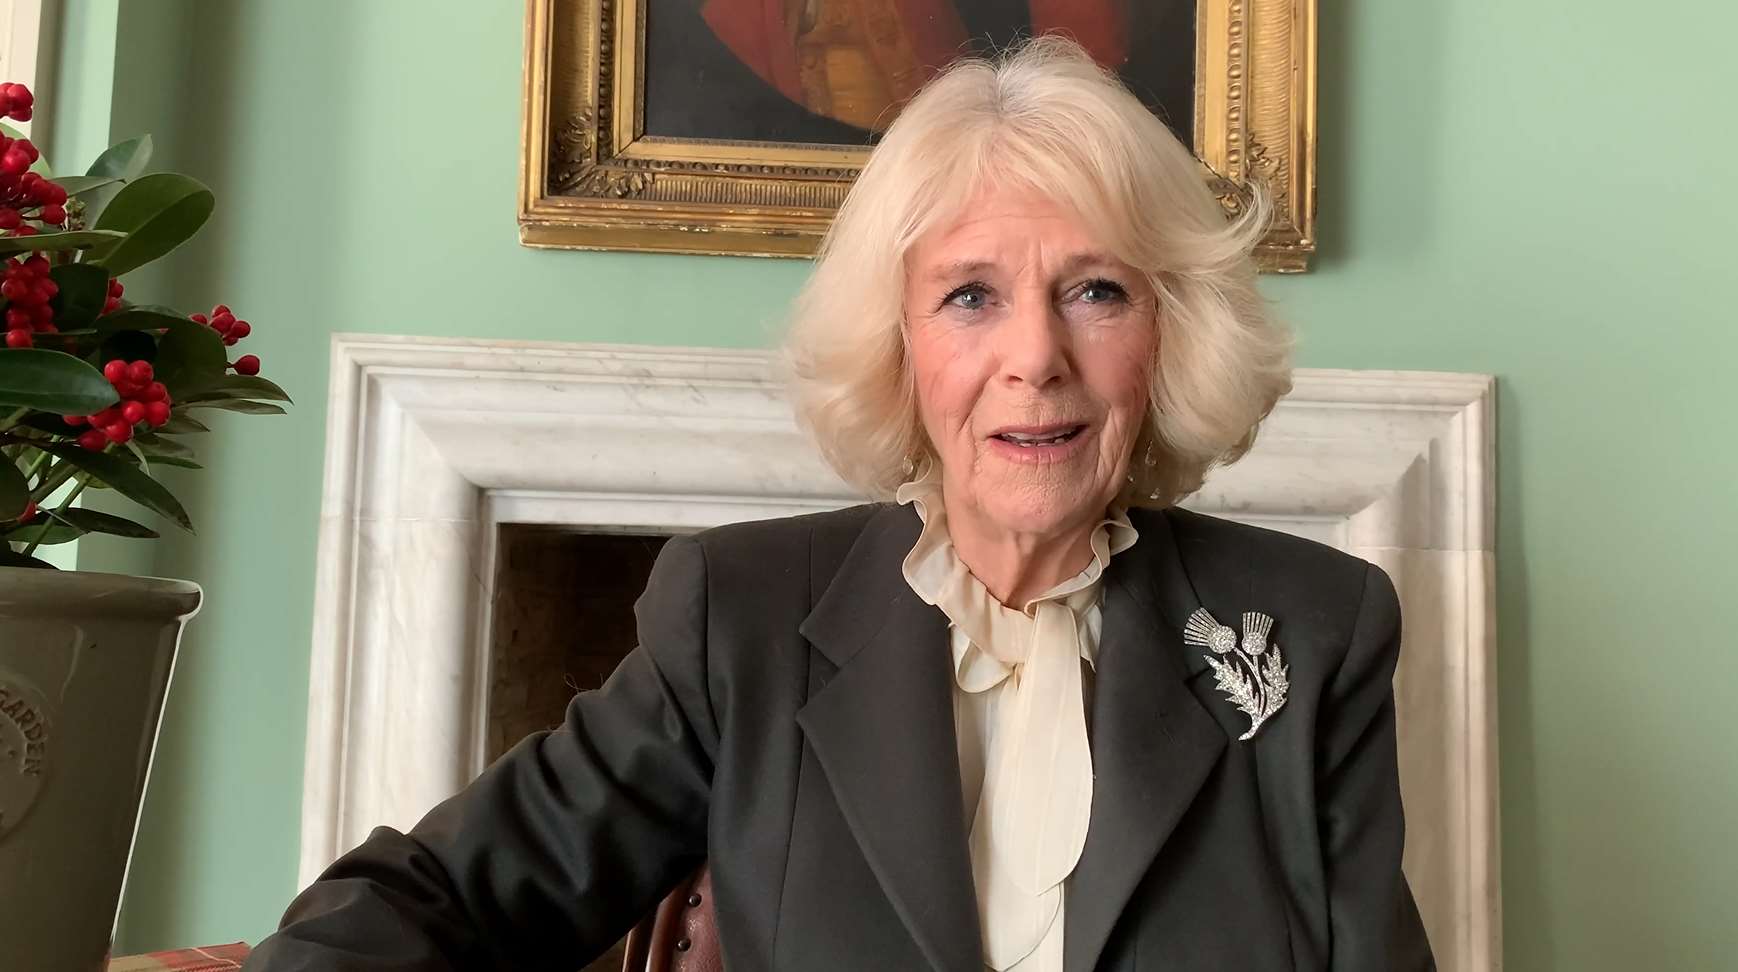 Camilla recorded a message for the University of Aberdeen’s virtual Extraordinary Burns Supper. Clarence House